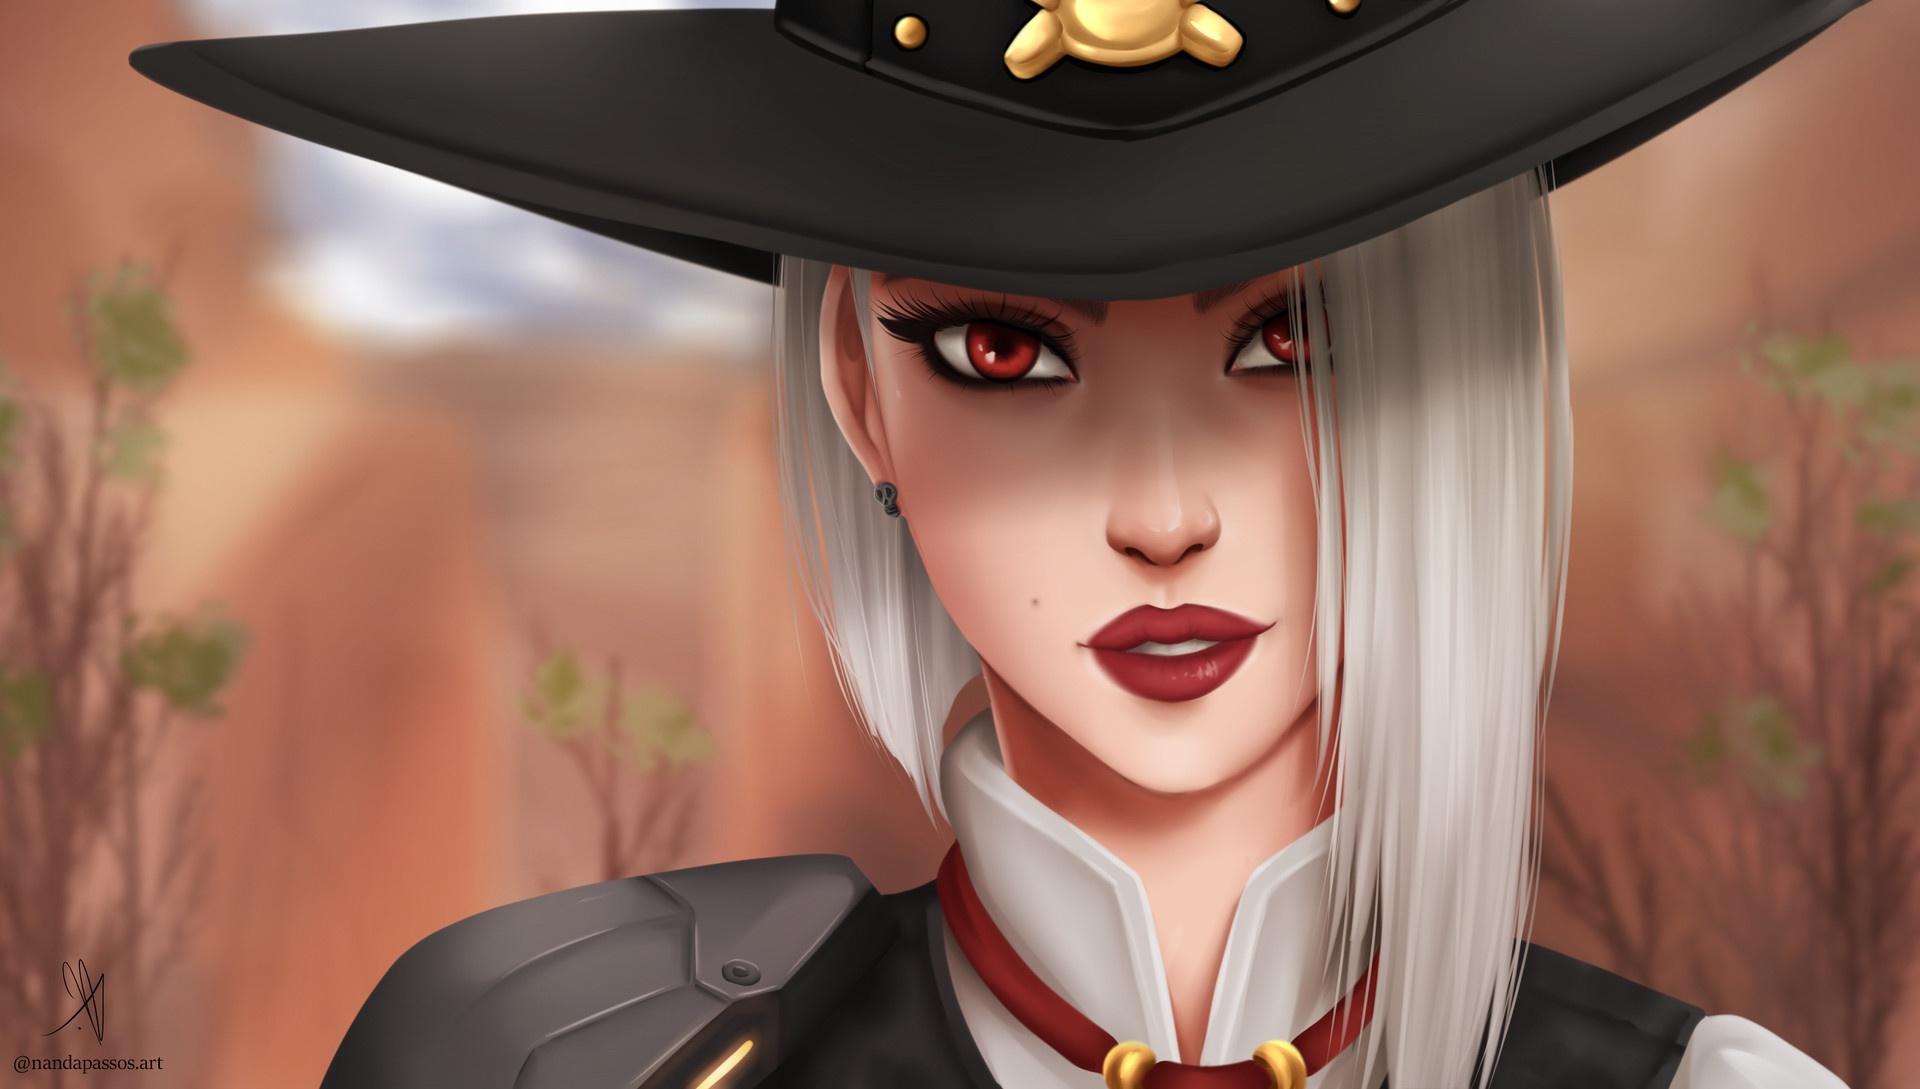 Ashe Overwatch Girl, HD Games, 4k Wallpapers, Image, Backgrounds